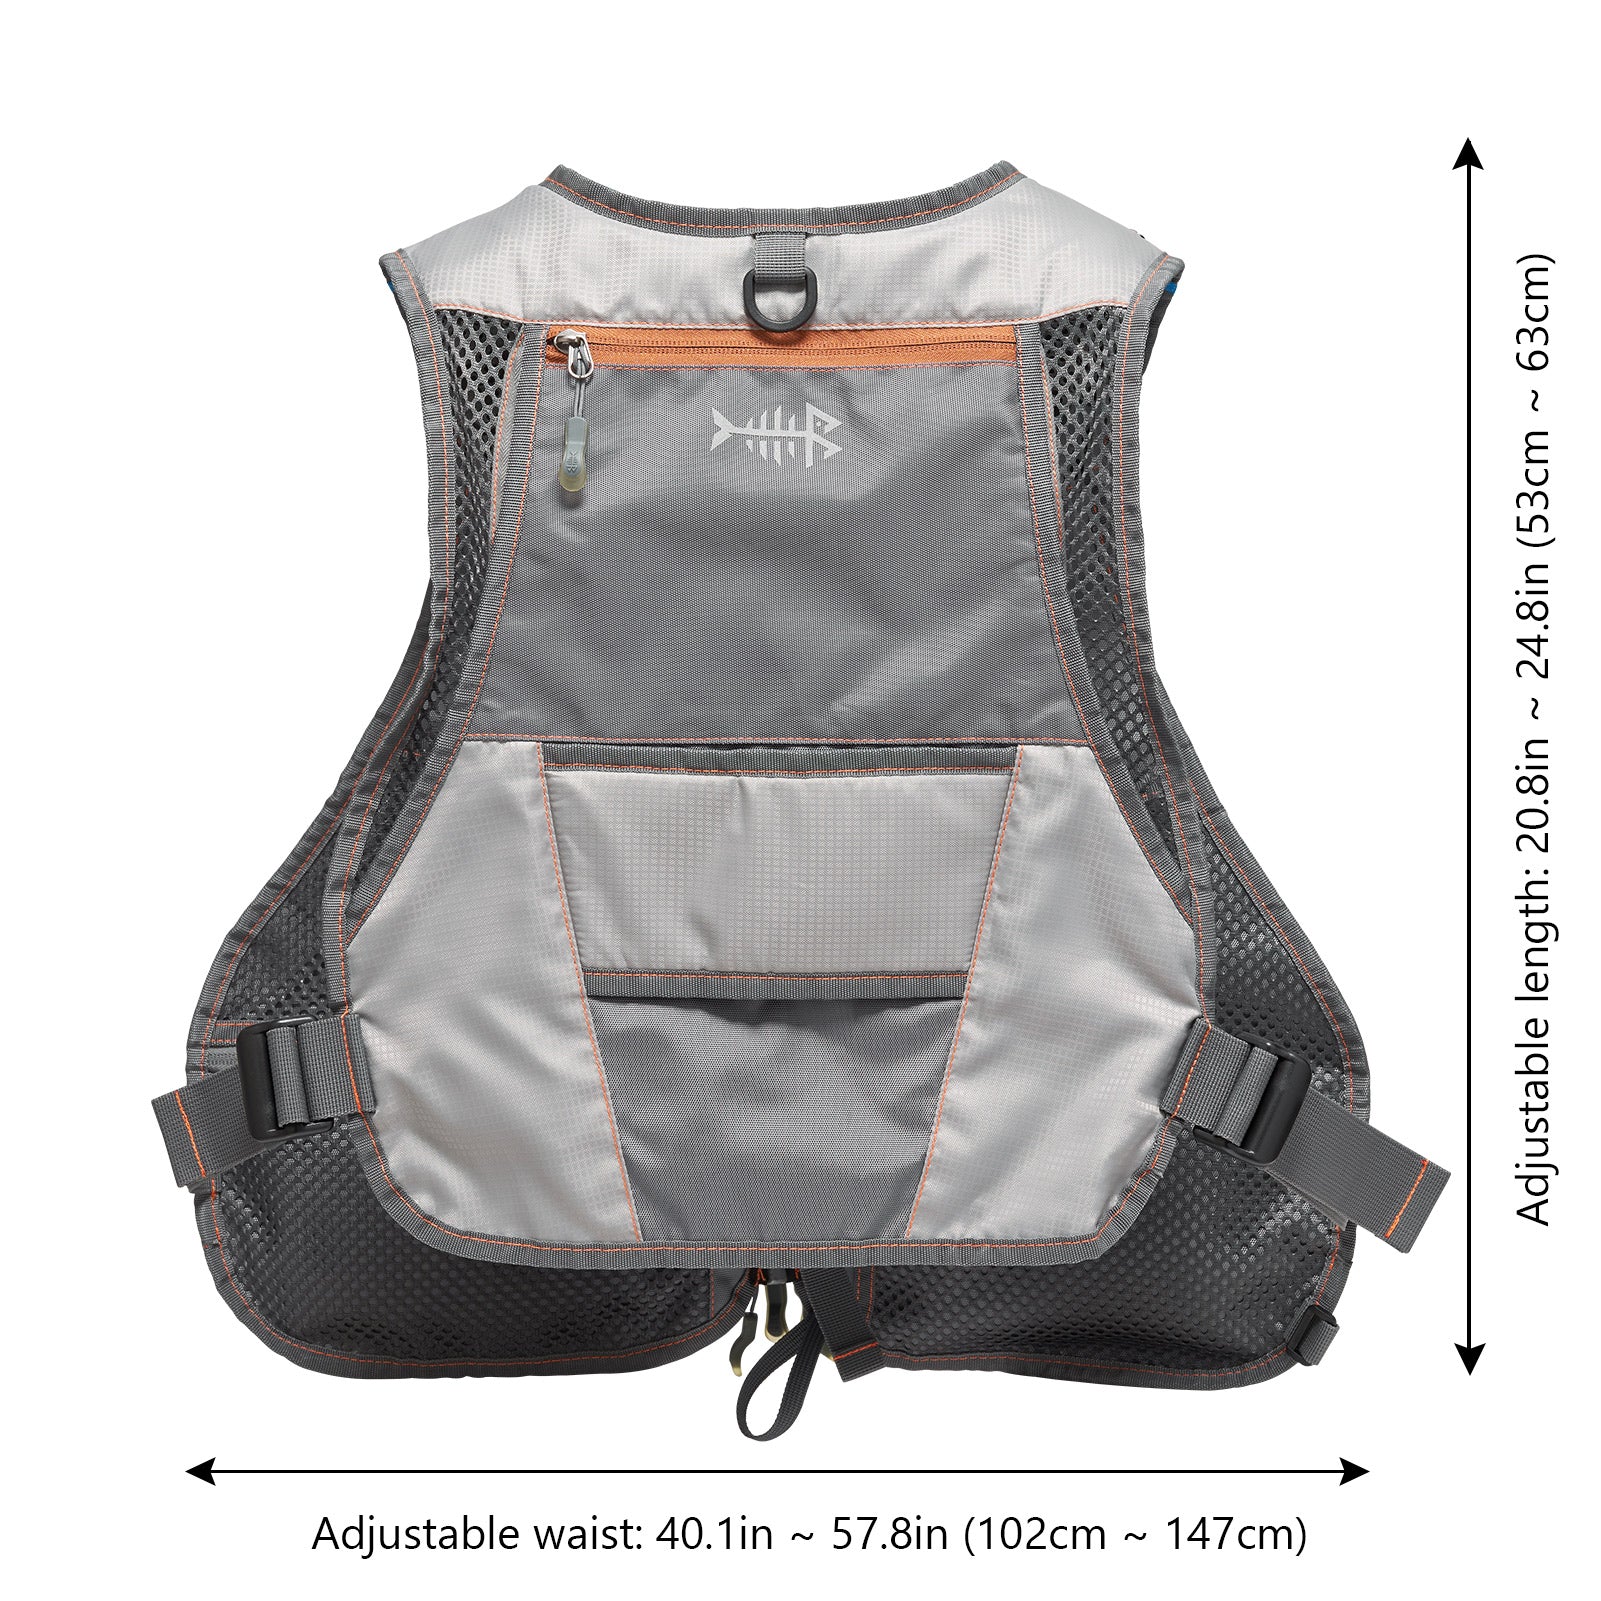 Bassdash Fv07 Fly Fishing Vest for Men and Women Adjustable Size with Detachable Water Bottle Holder Women’s - Grey/Light Pink - One Size